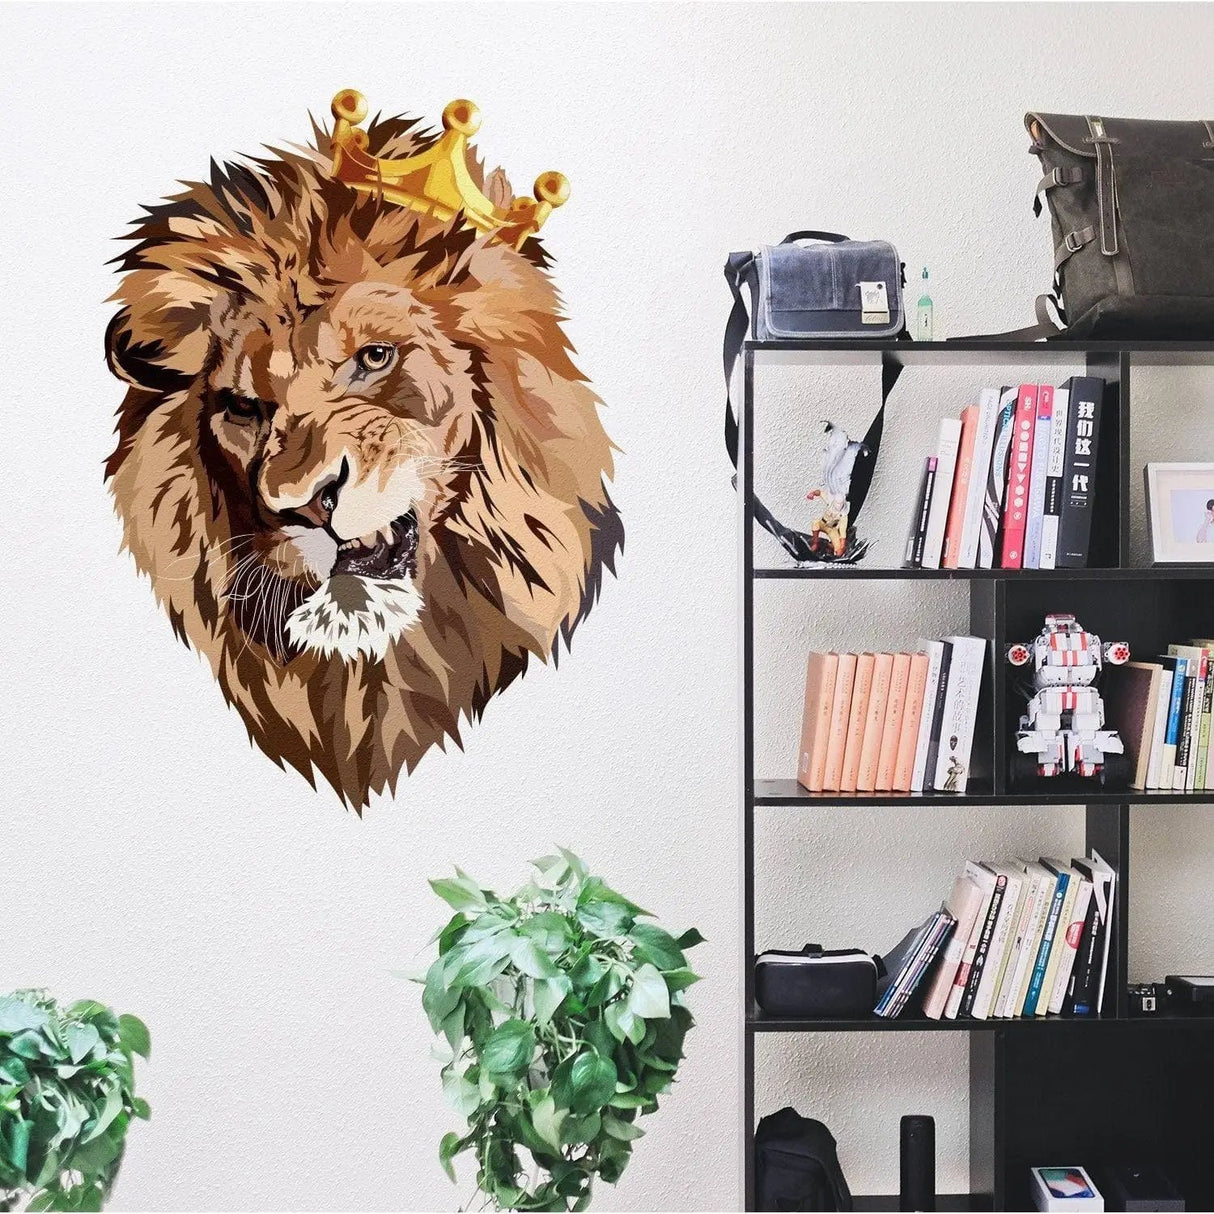 Lion King With Crown Vinyl Wall Sticker - Funny Lions Head Cut Seal Art Decal - Fun Silhouette Theme Wildlife Decoration Decor Print - Decords